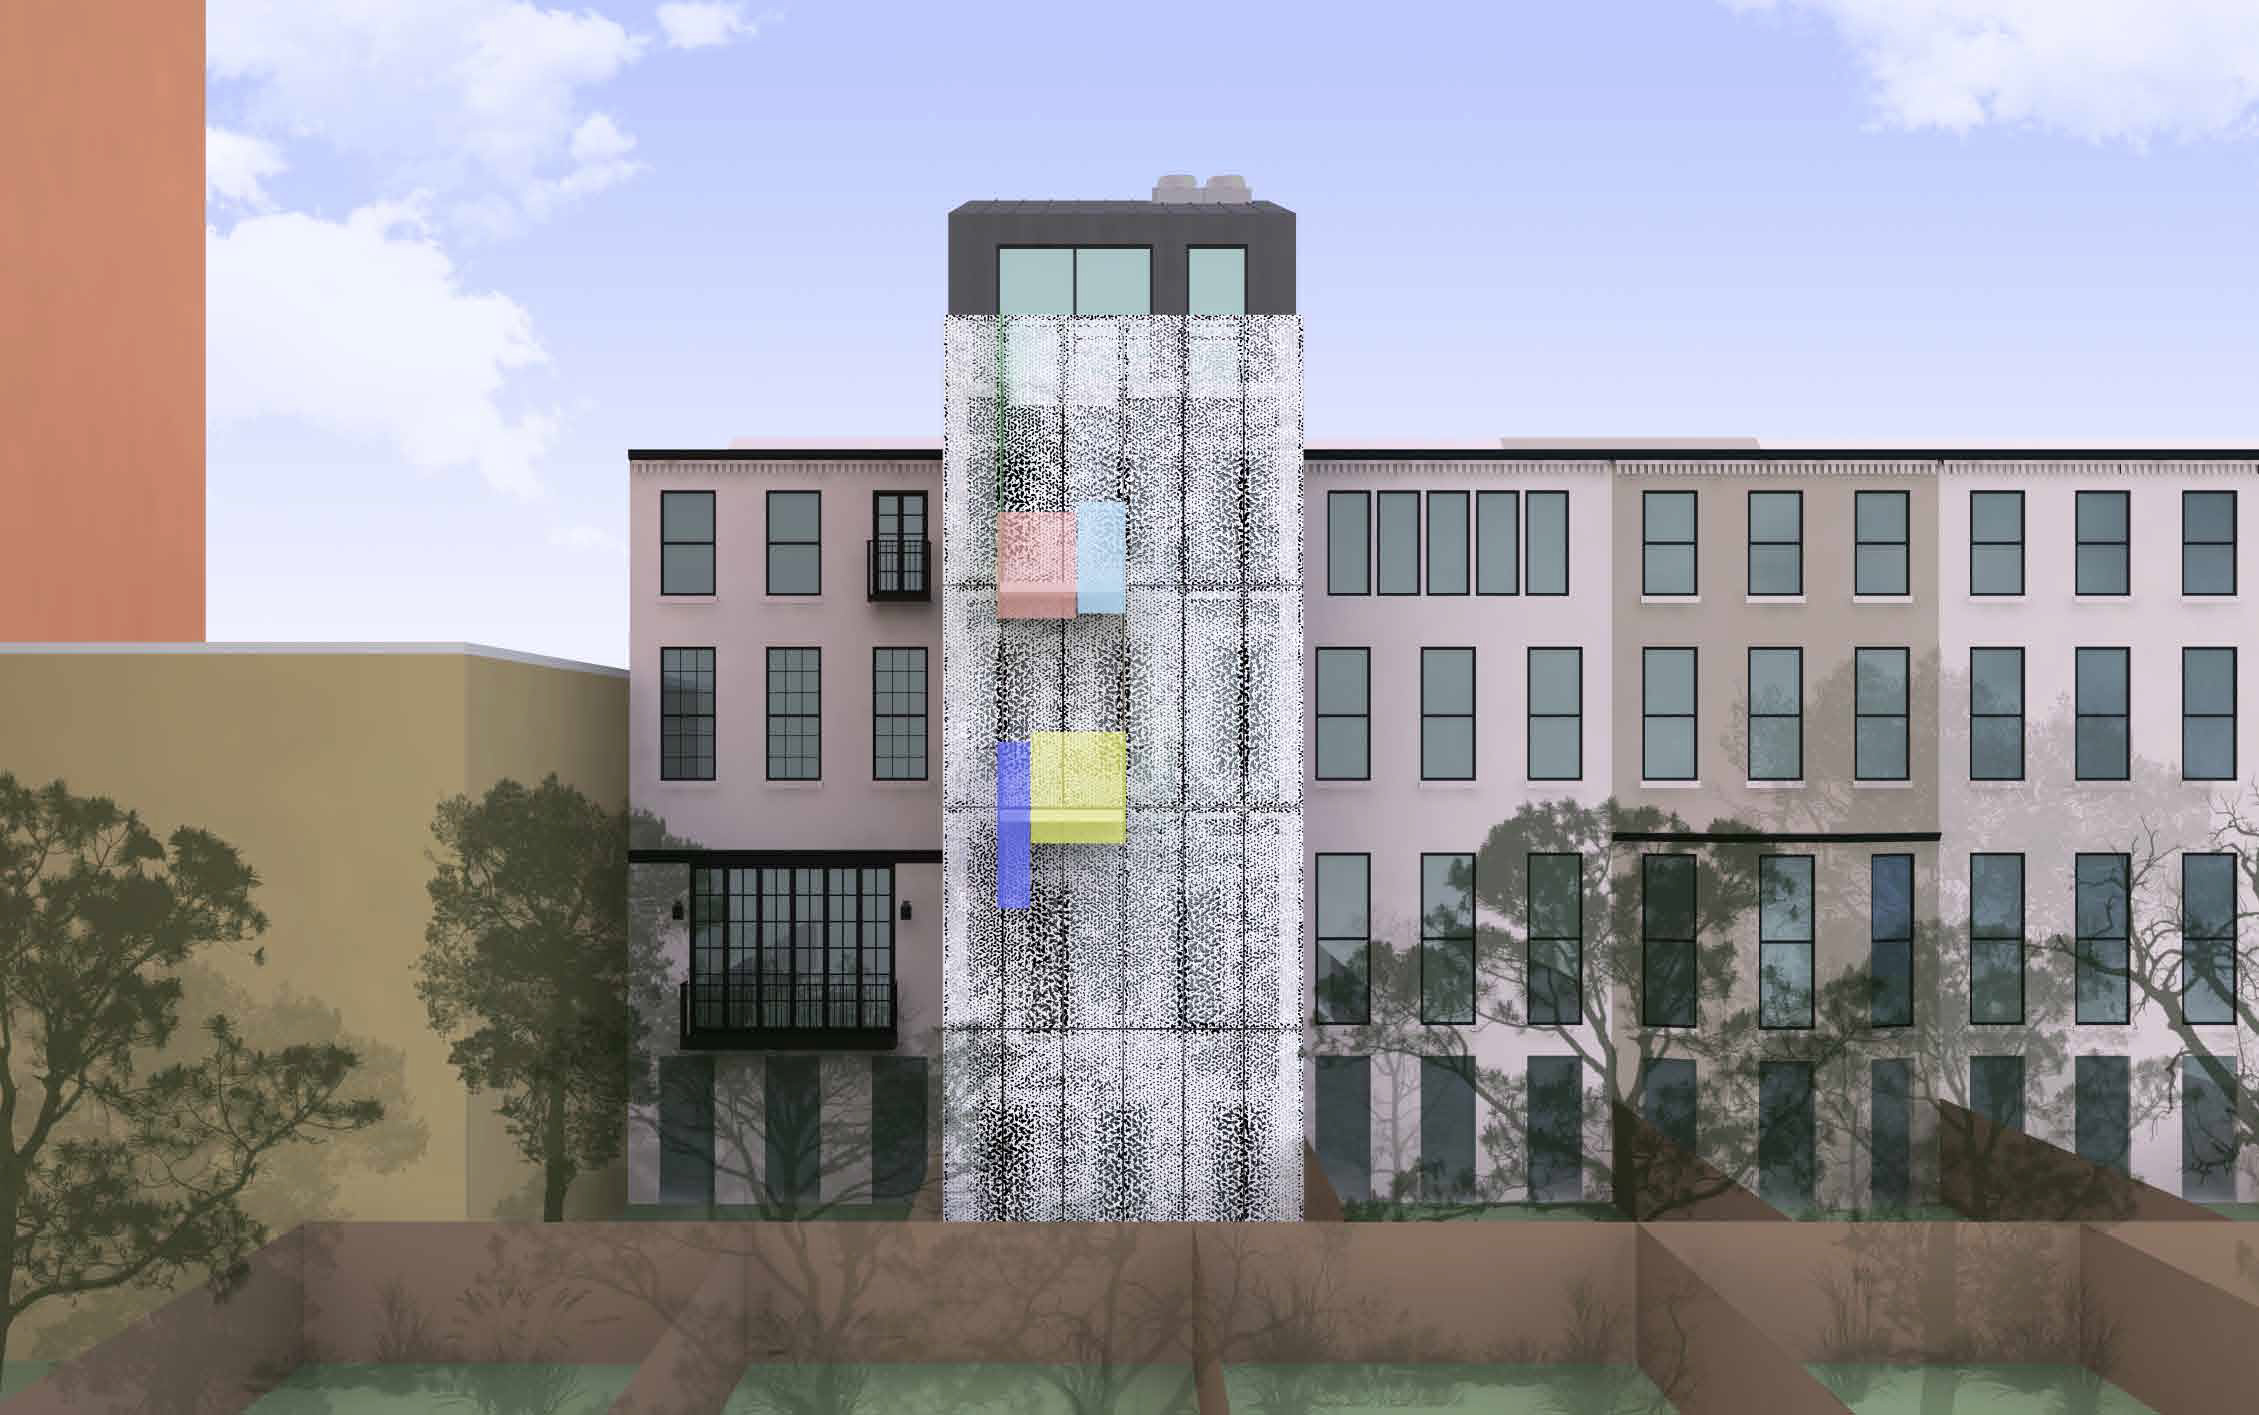 Proposed rear of 210 East 62nd Street, with screen closed